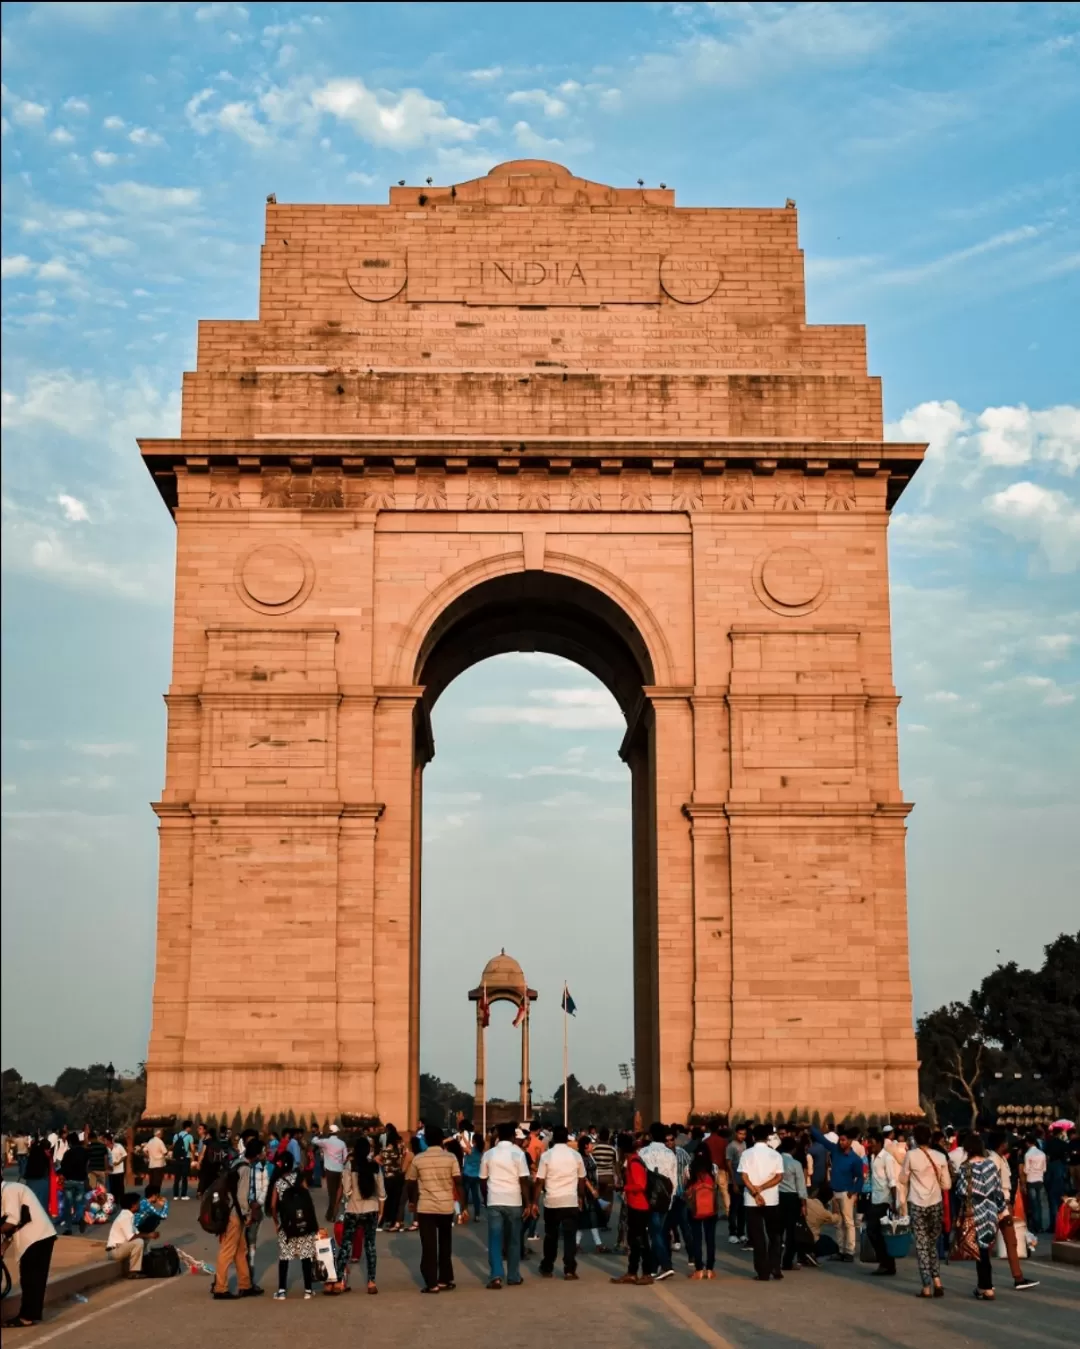 Photo of India Gate By Anshul Chaudhary